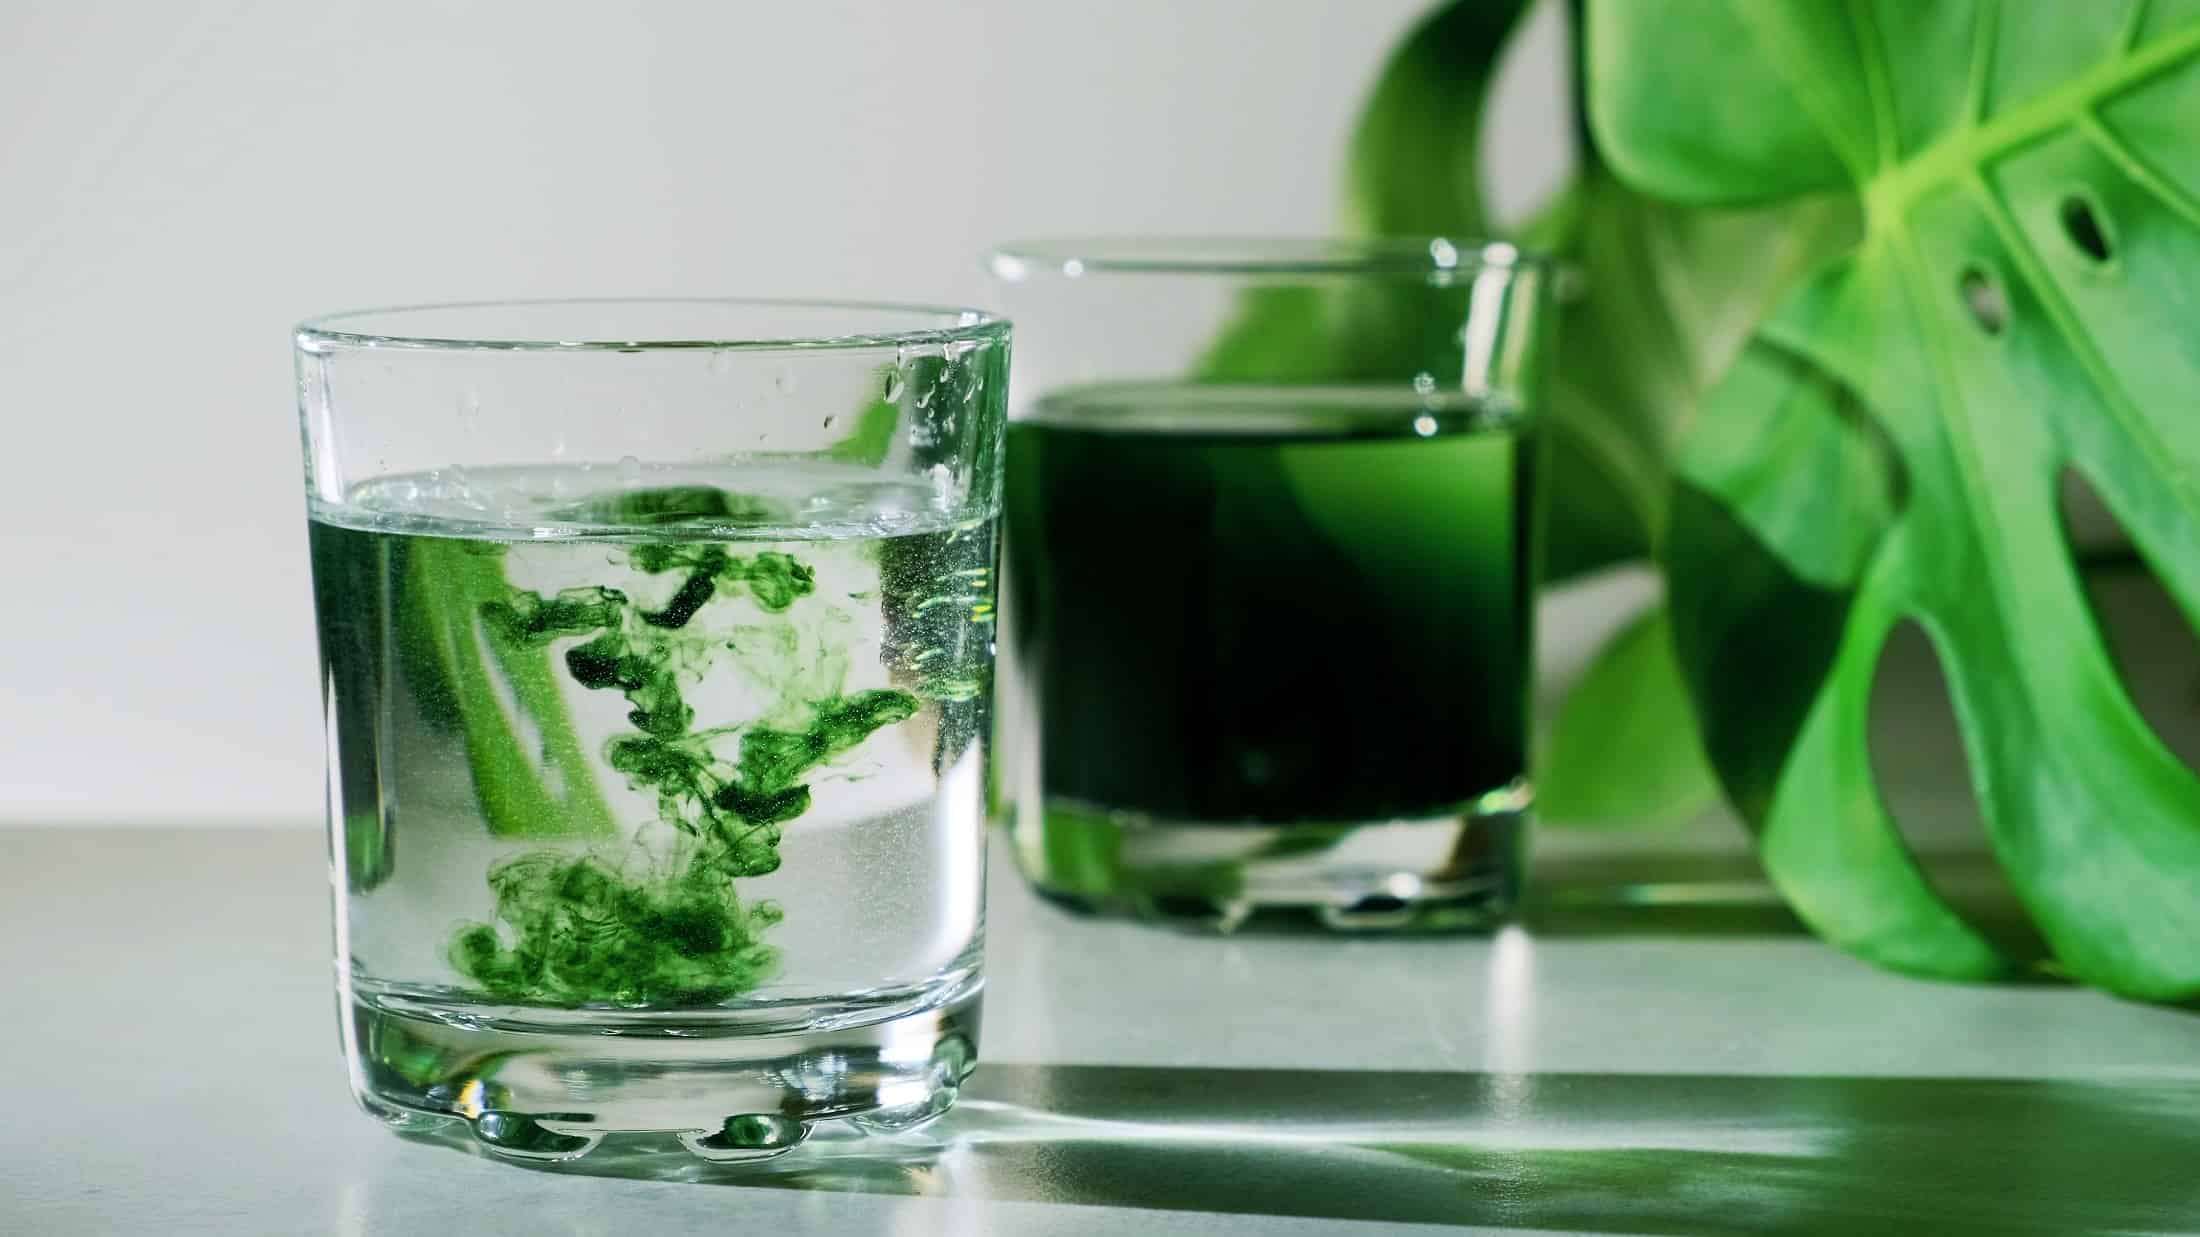 Drinking chlorophyll – why do most currently incorporate it into their health rituals?